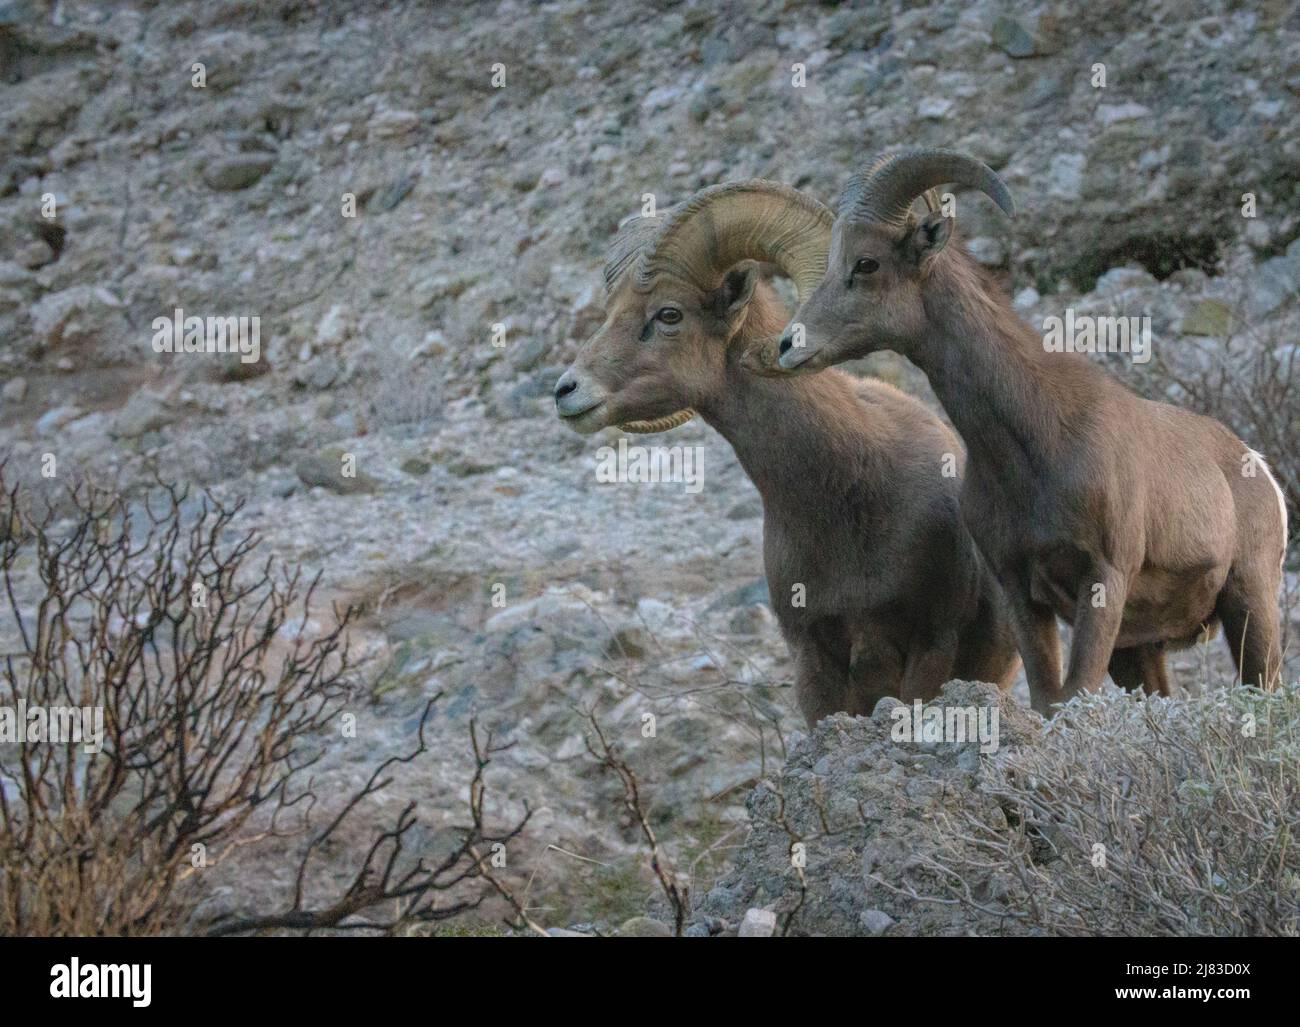 A pair of bighorn sheep forage the high desert in winter at the Sand to Snow National Monument near Palm Springs, California. Stock Photo